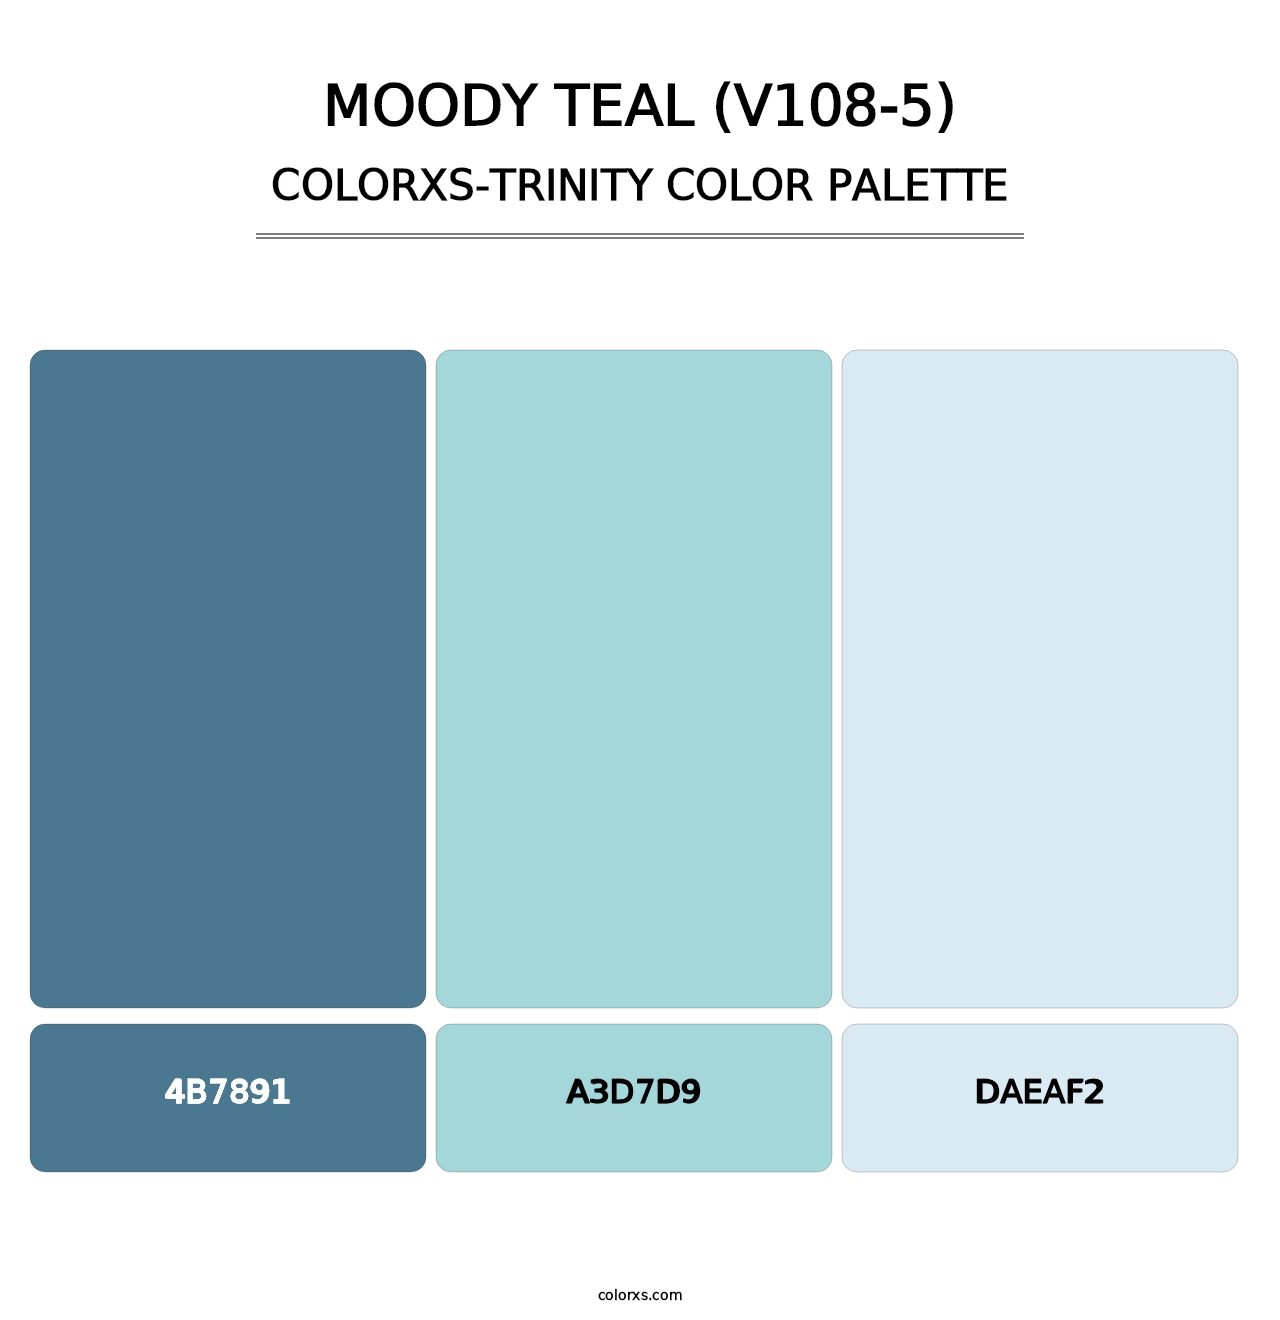 Moody Teal (V108-5) - Colorxs Trinity Palette